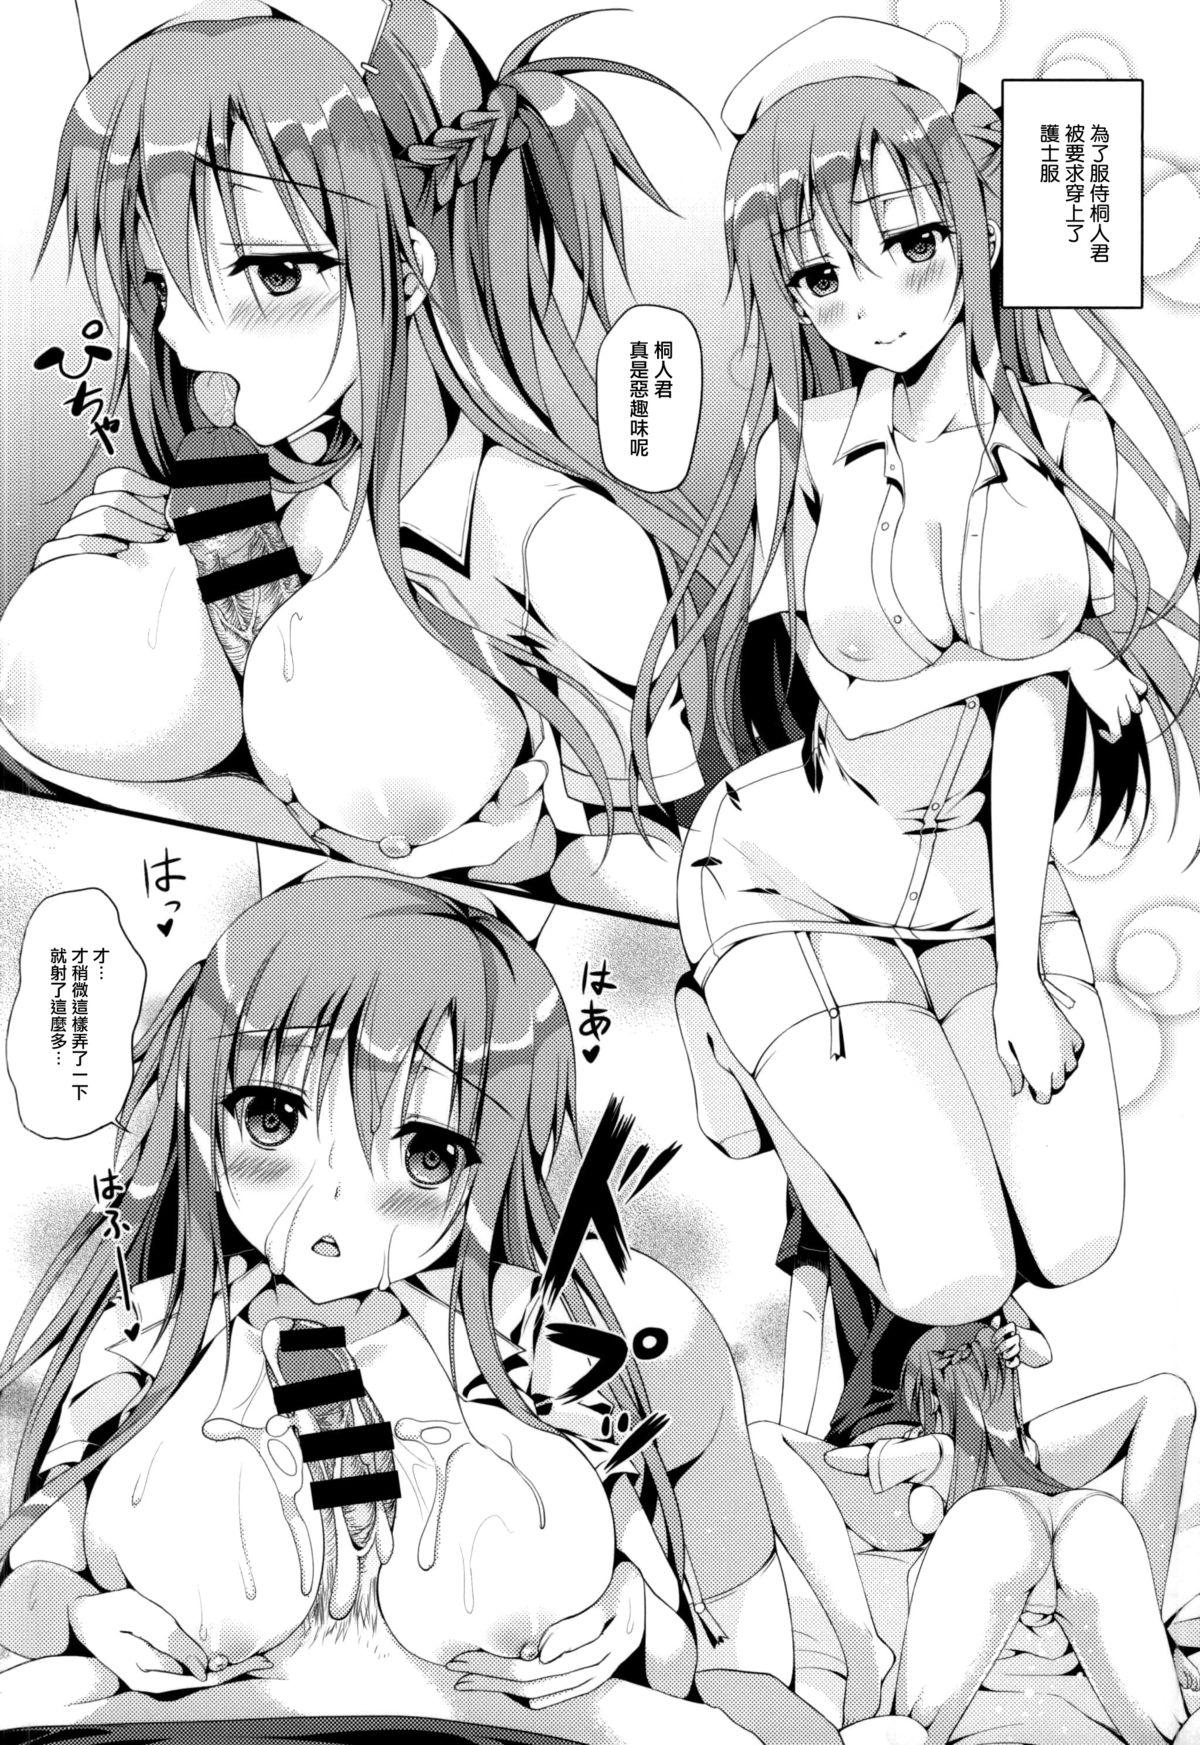 Great Fuck WIFE - Sword art online Camgirl - Page 12